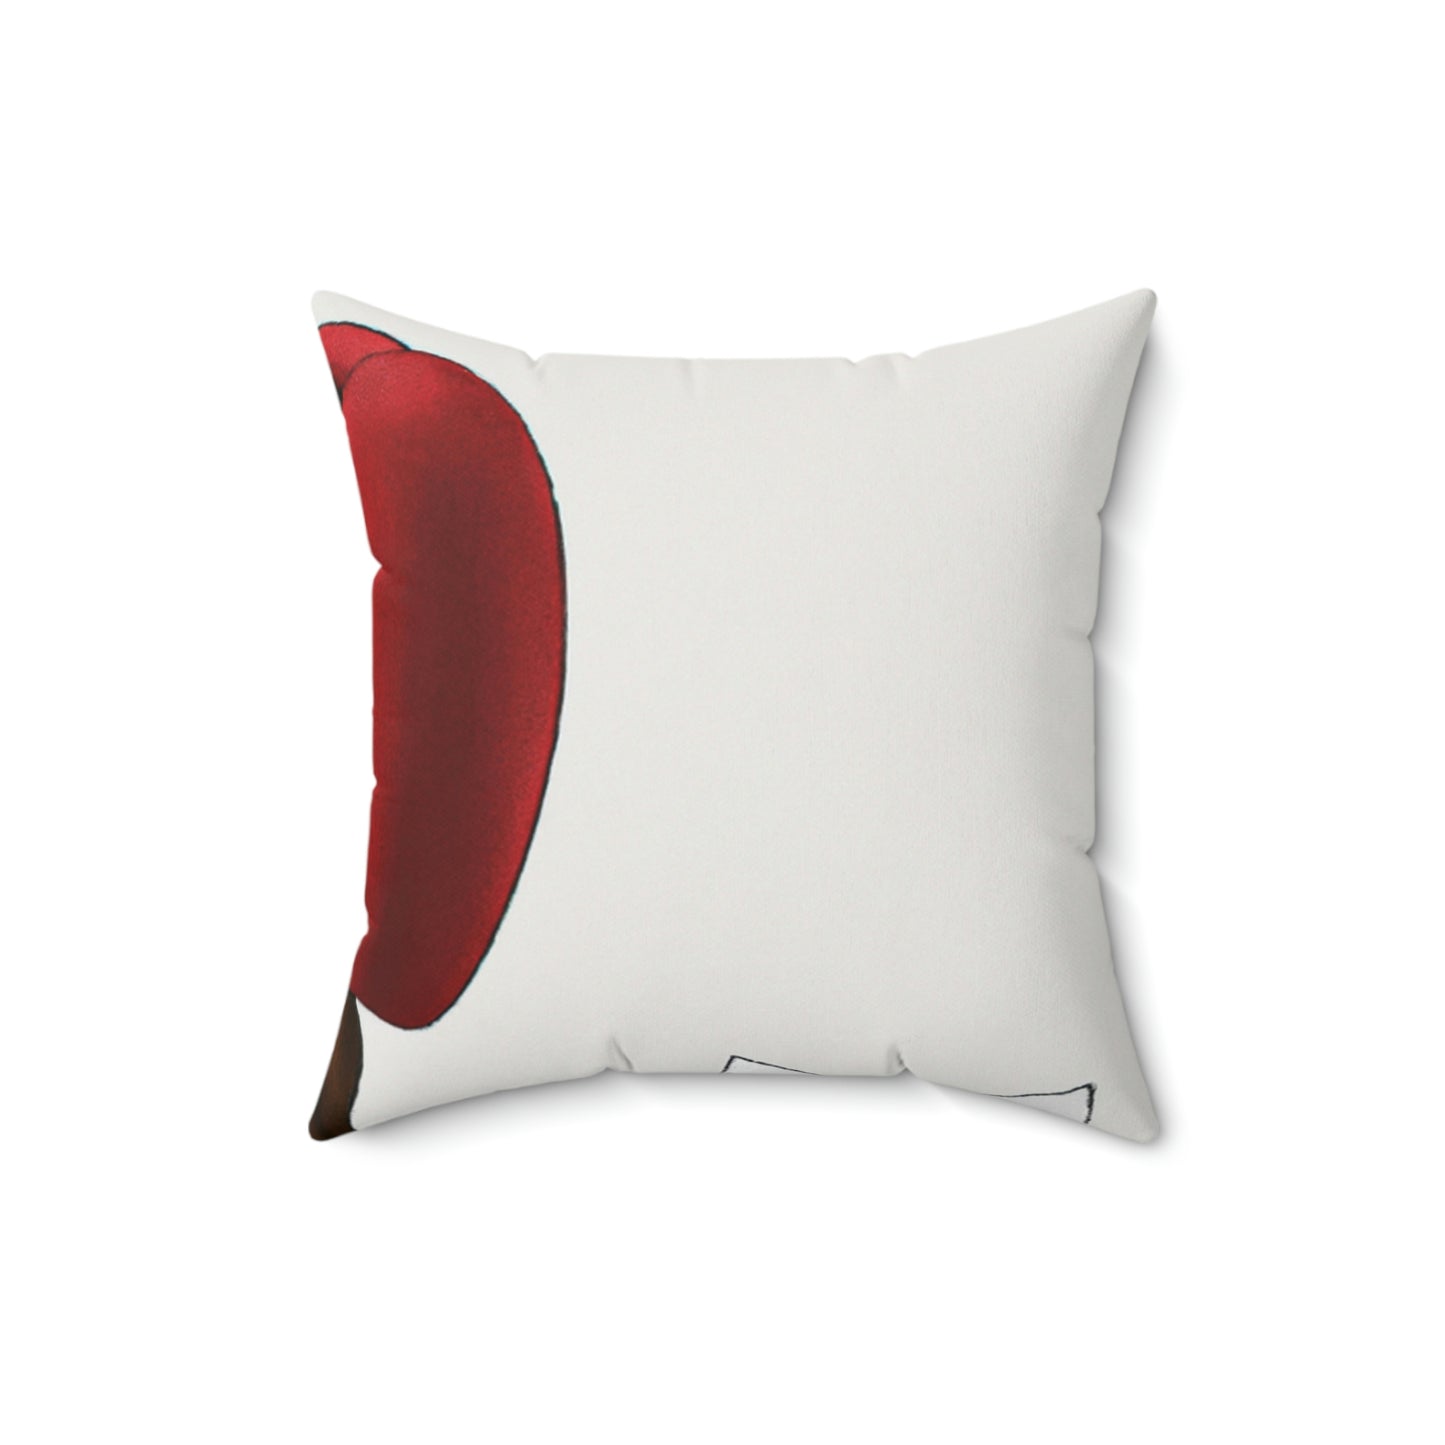 "The Roguish Apple Tree" - The Alien Square Pillow